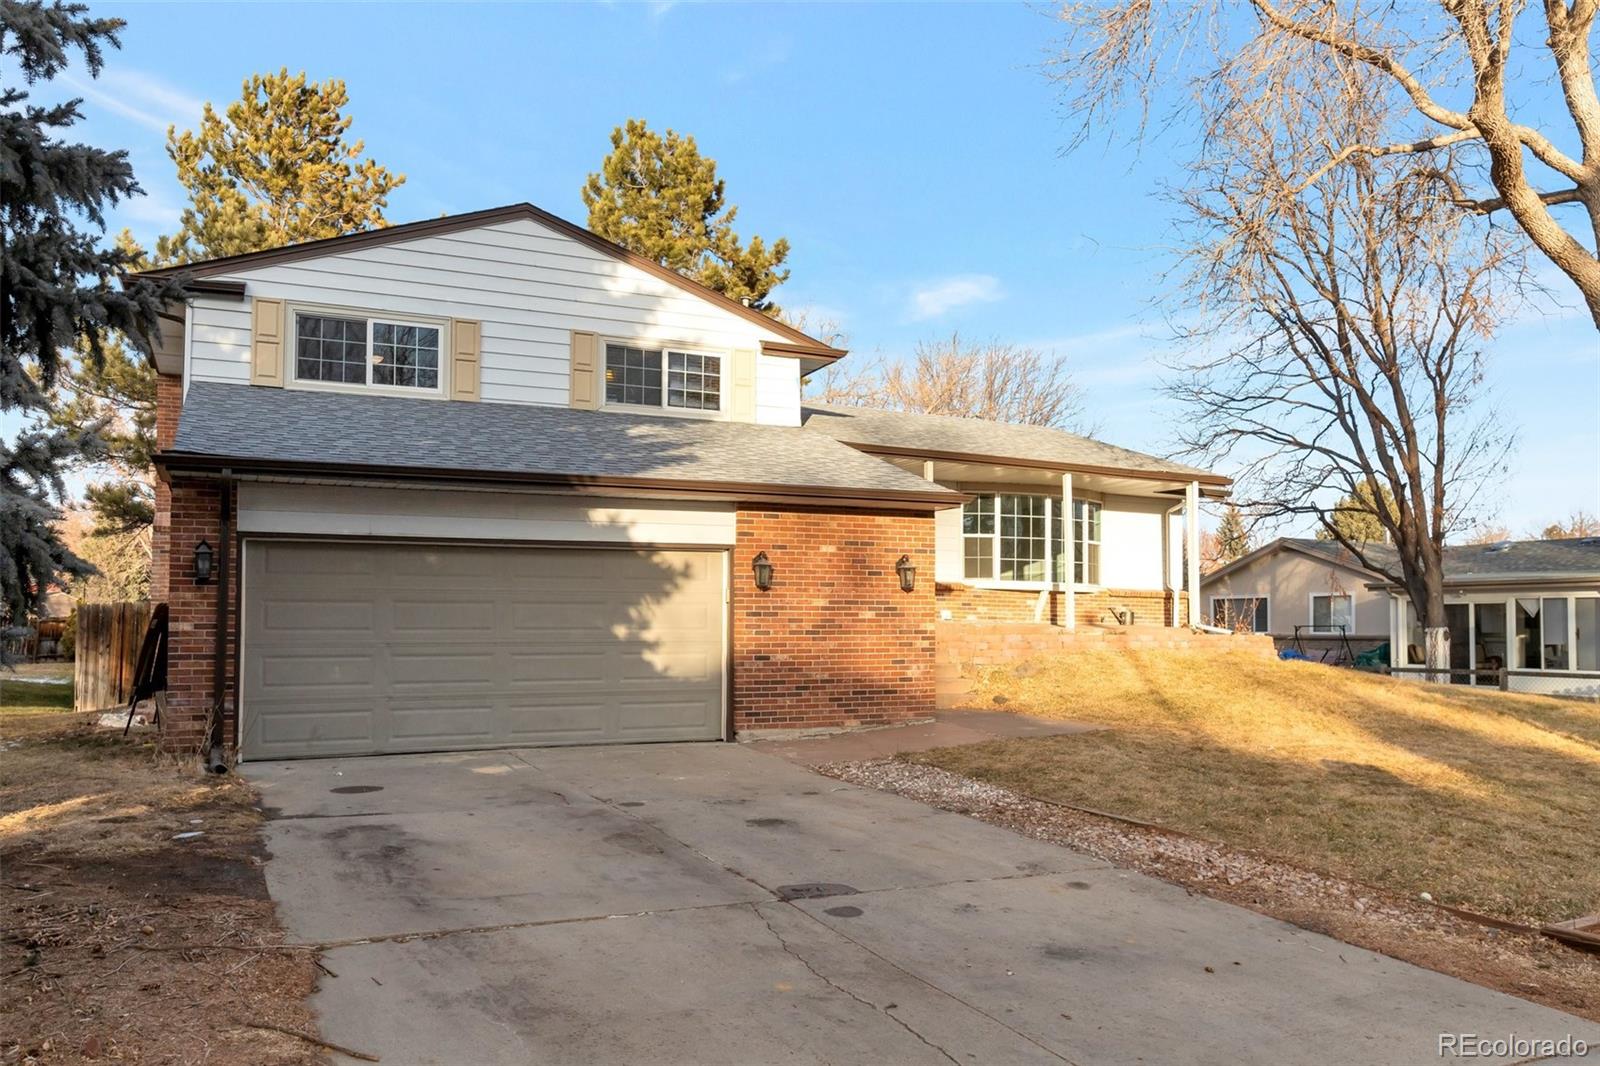 11437 w 69th place, arvada sold home. Closed on 2024-03-08 for $685,000.